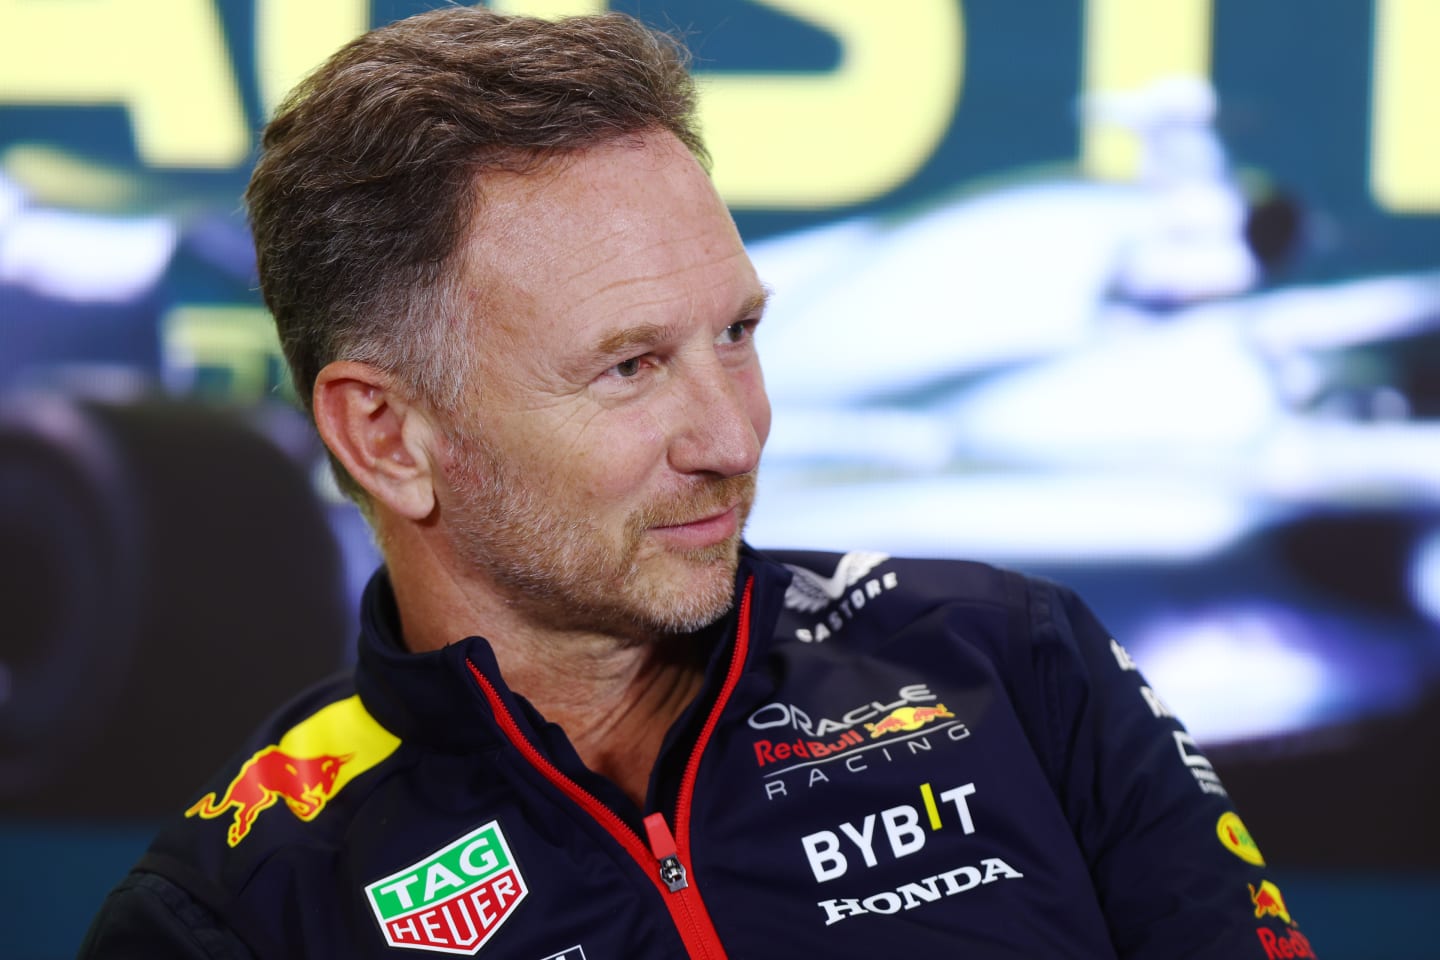 MELBOURNE, AUSTRALIA - MARCH 31: Red Bull Racing Team Principal Christian Horner looks on in the